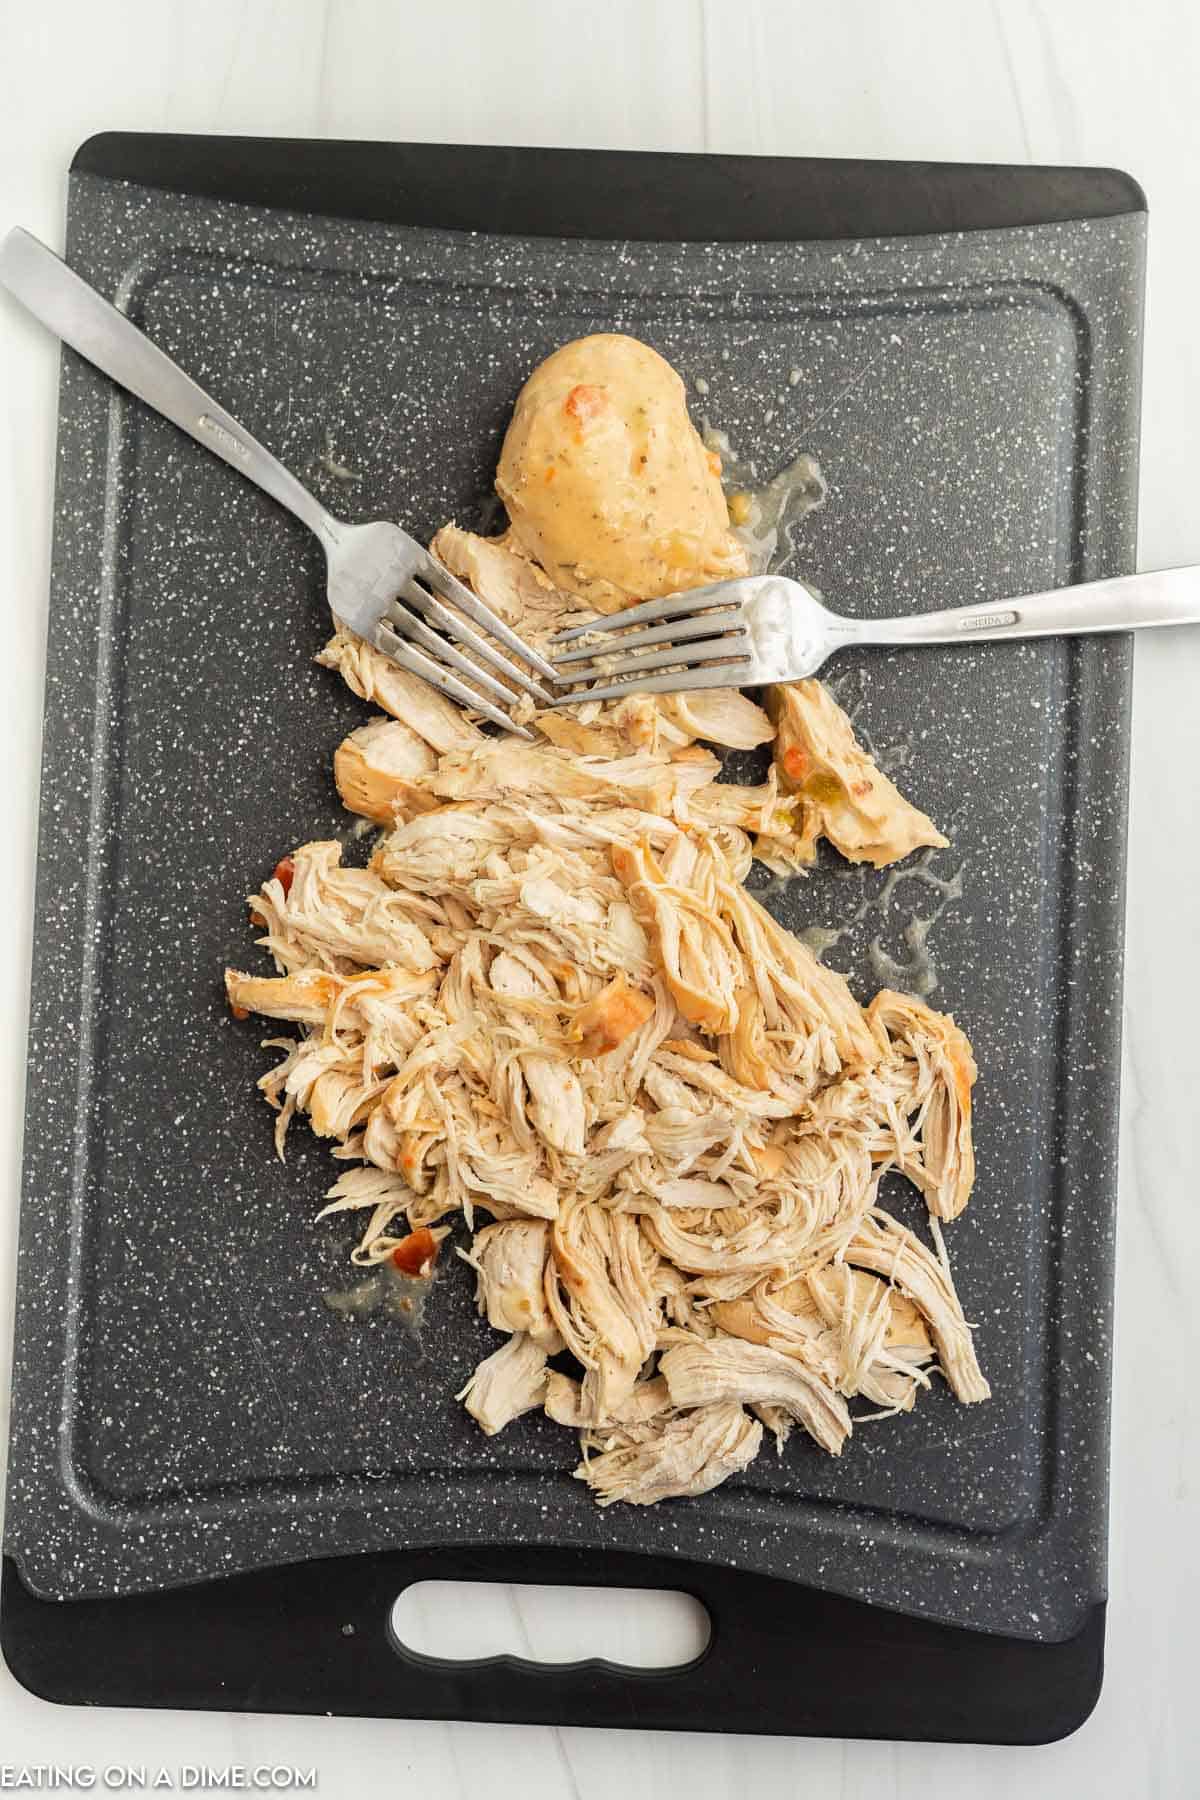 Shredded chicken on a cutting board with two forks